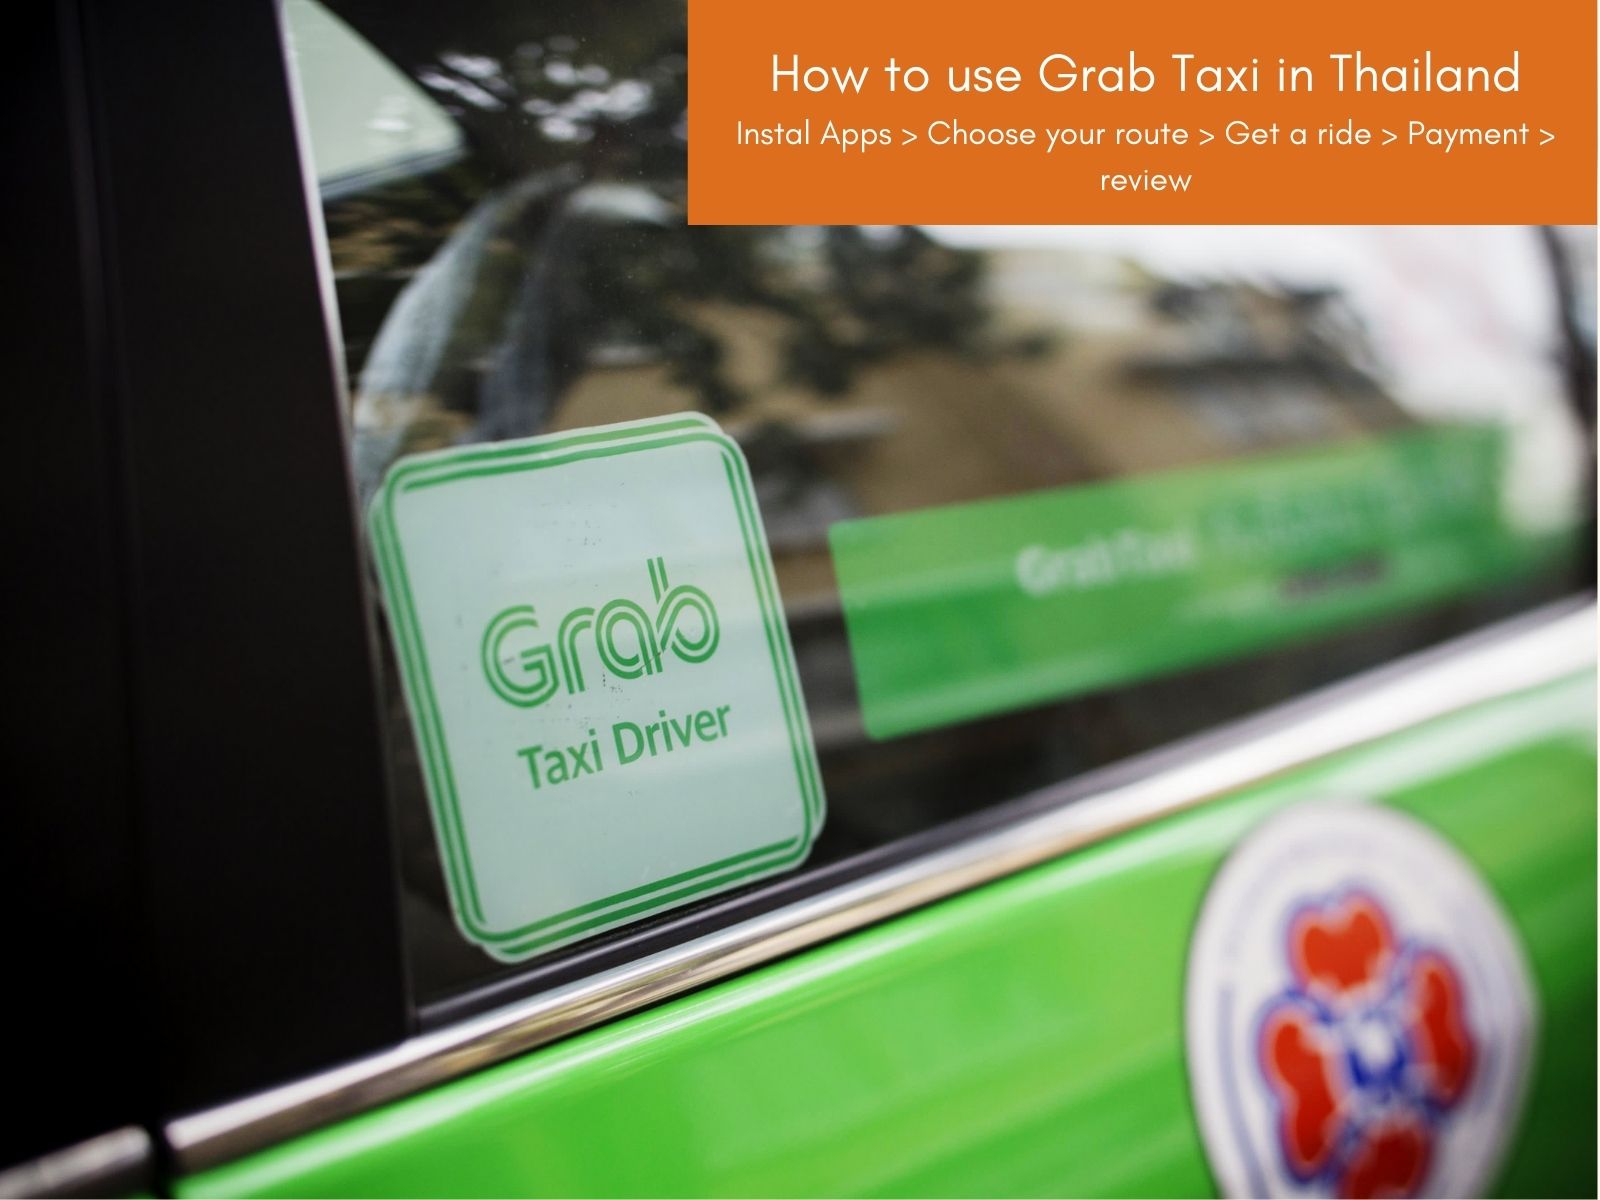 How to book a grab taxi in Bangkok